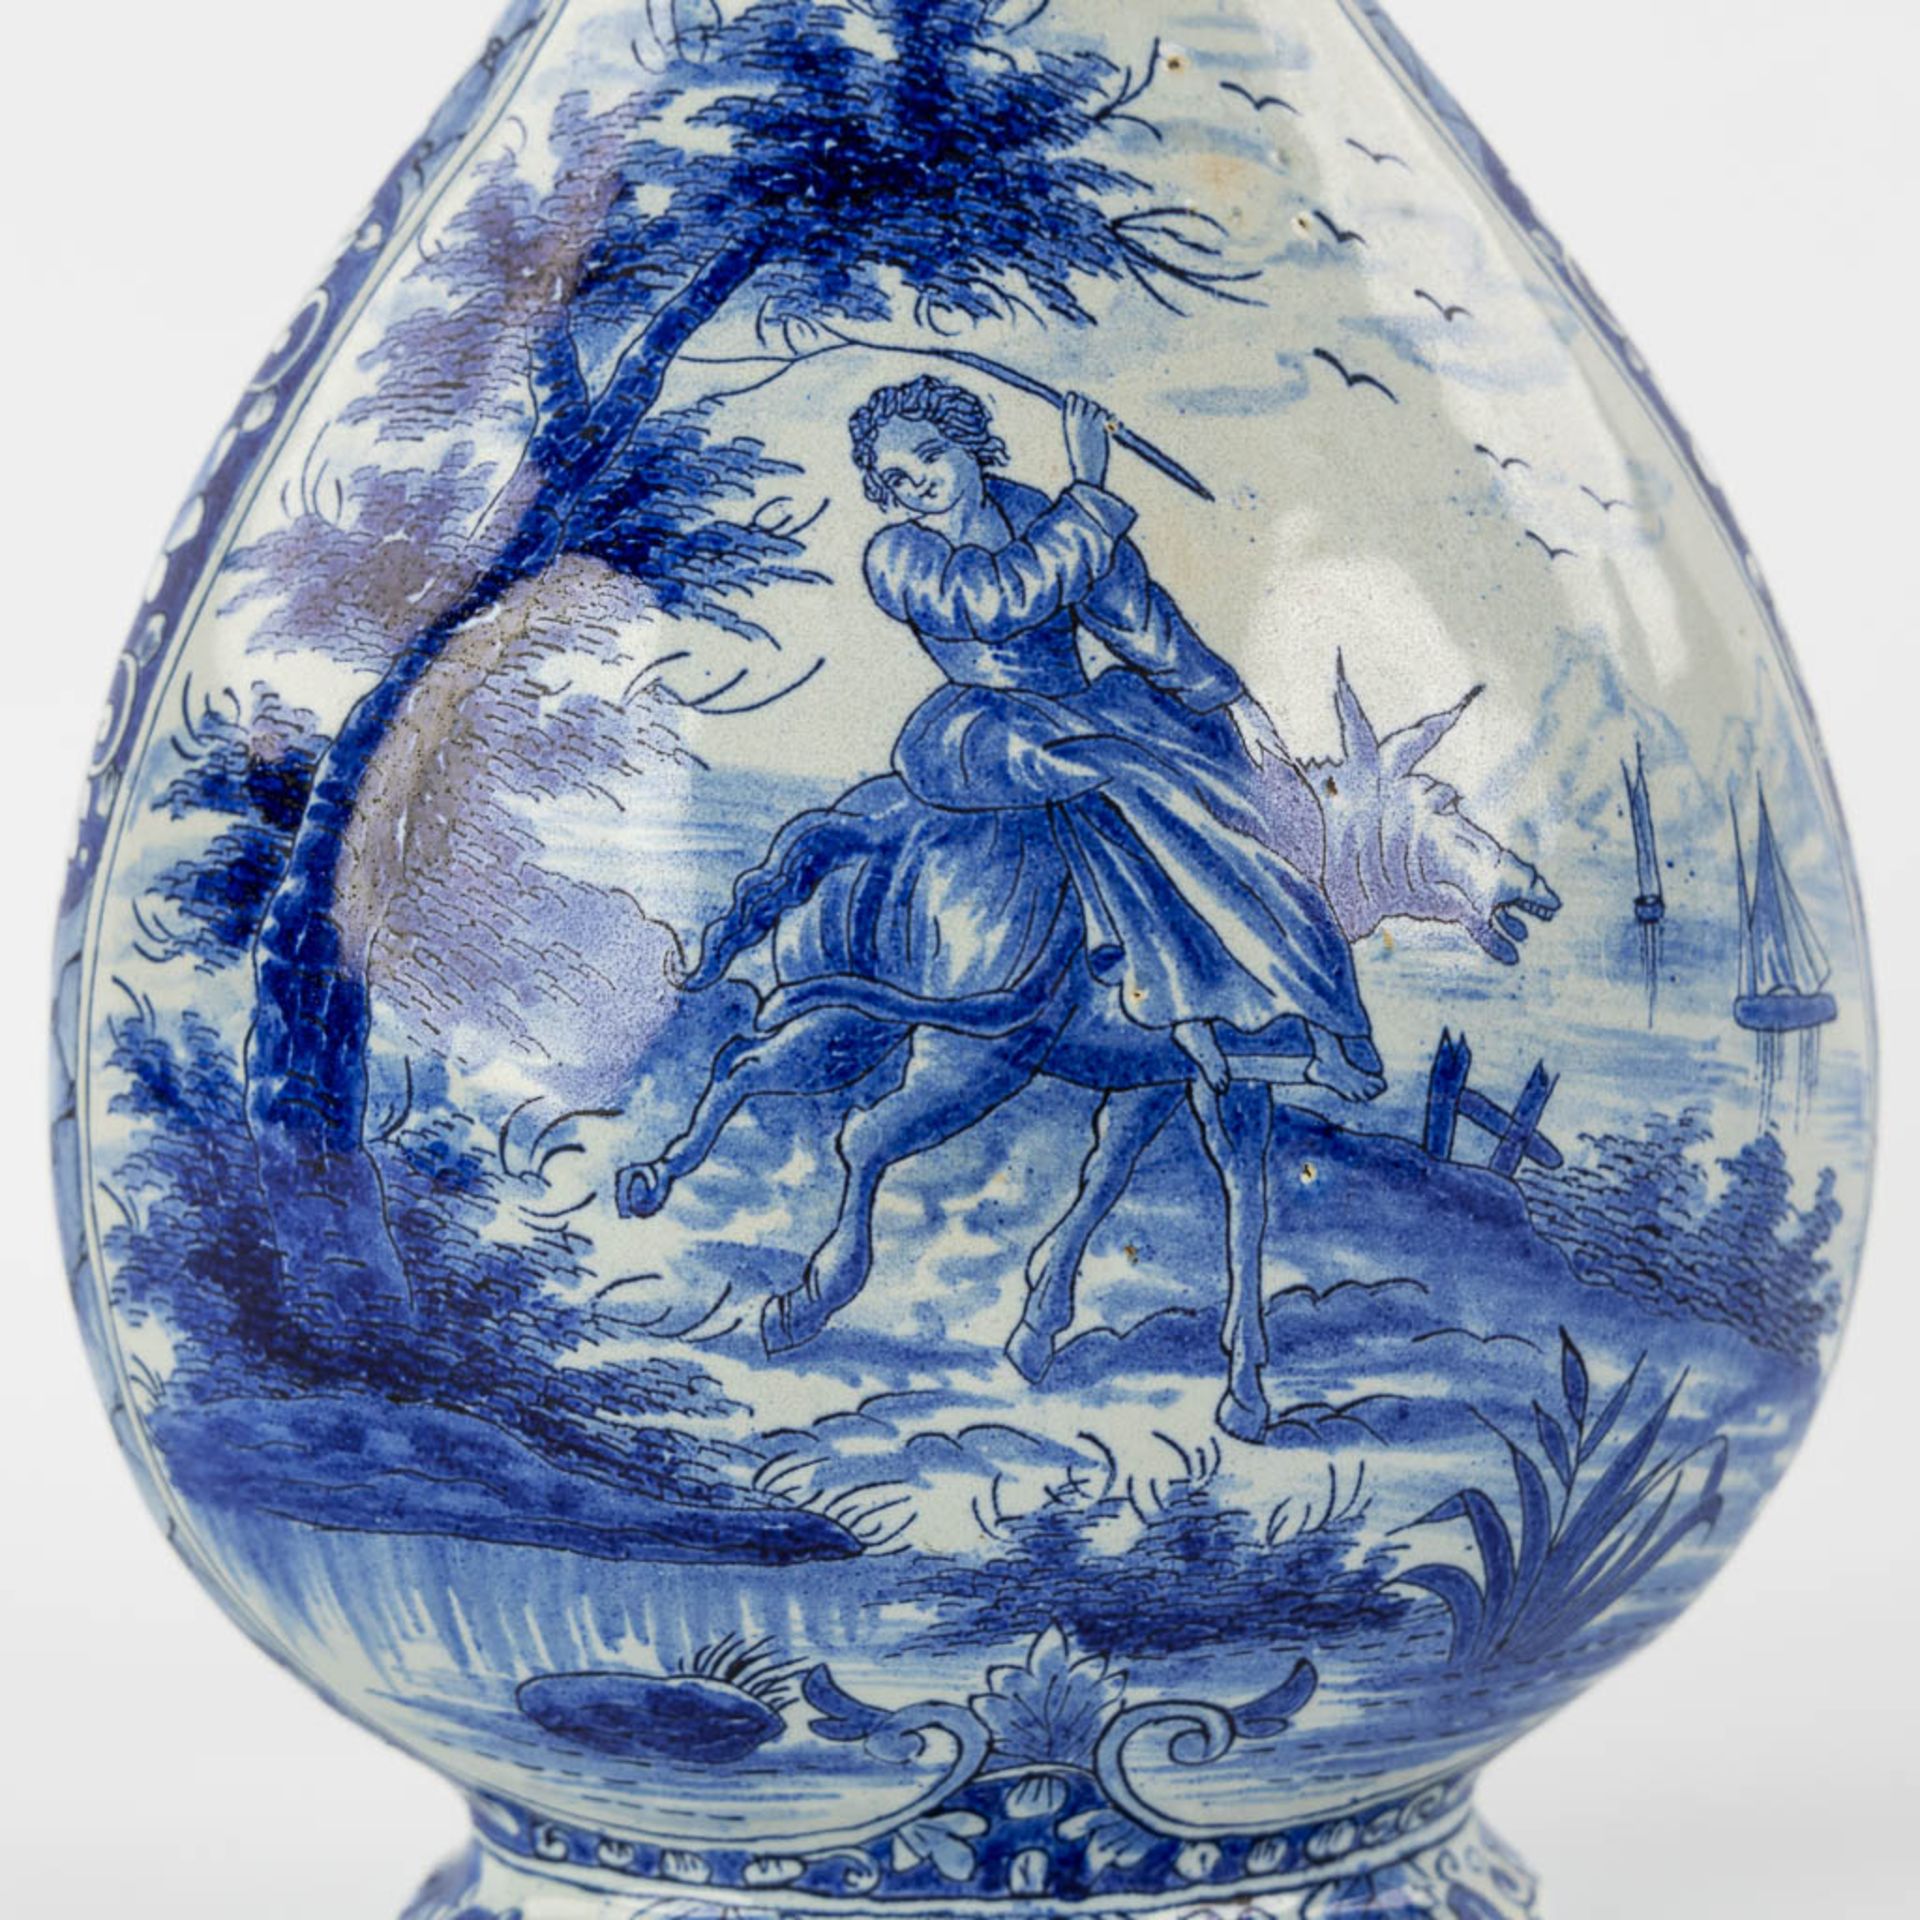 Geertrui Verstelle, Delft, a pair of vases with a landscape decor. Mid 18th C. (L:9 x W:14 x H:26,5 - Image 12 of 15